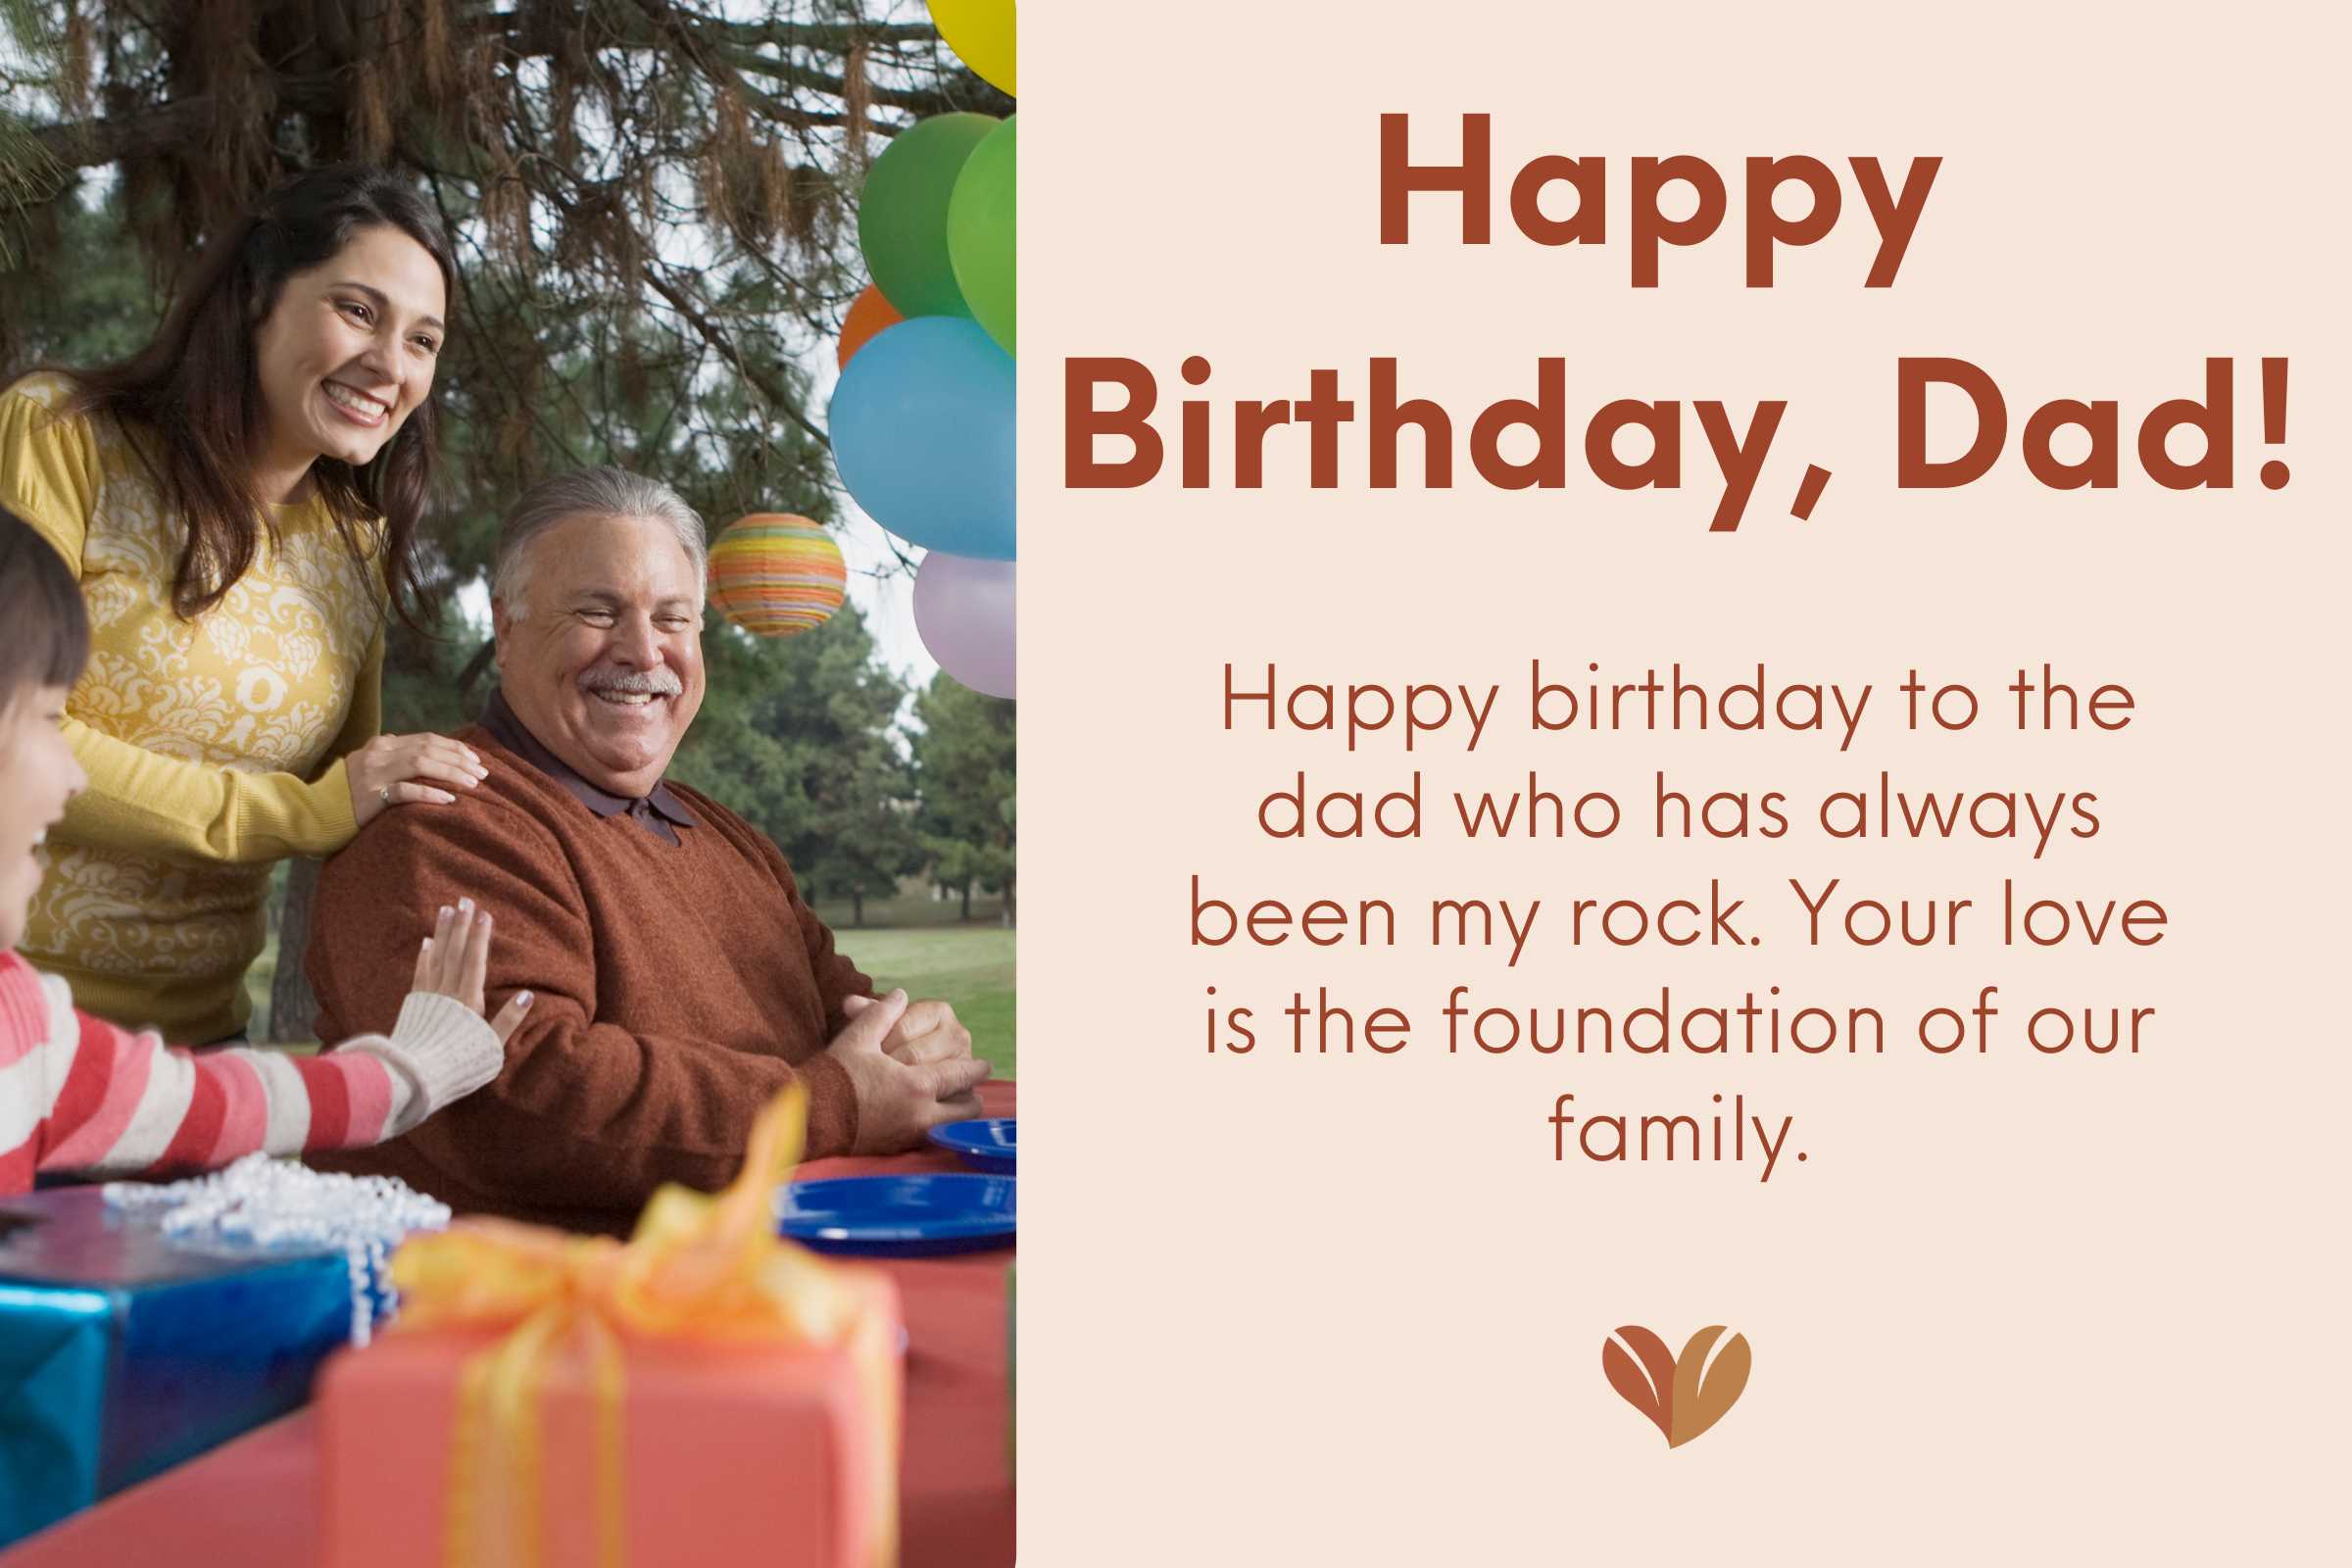 May your birthday be as special as you are to me - Best birthday wishes for dad